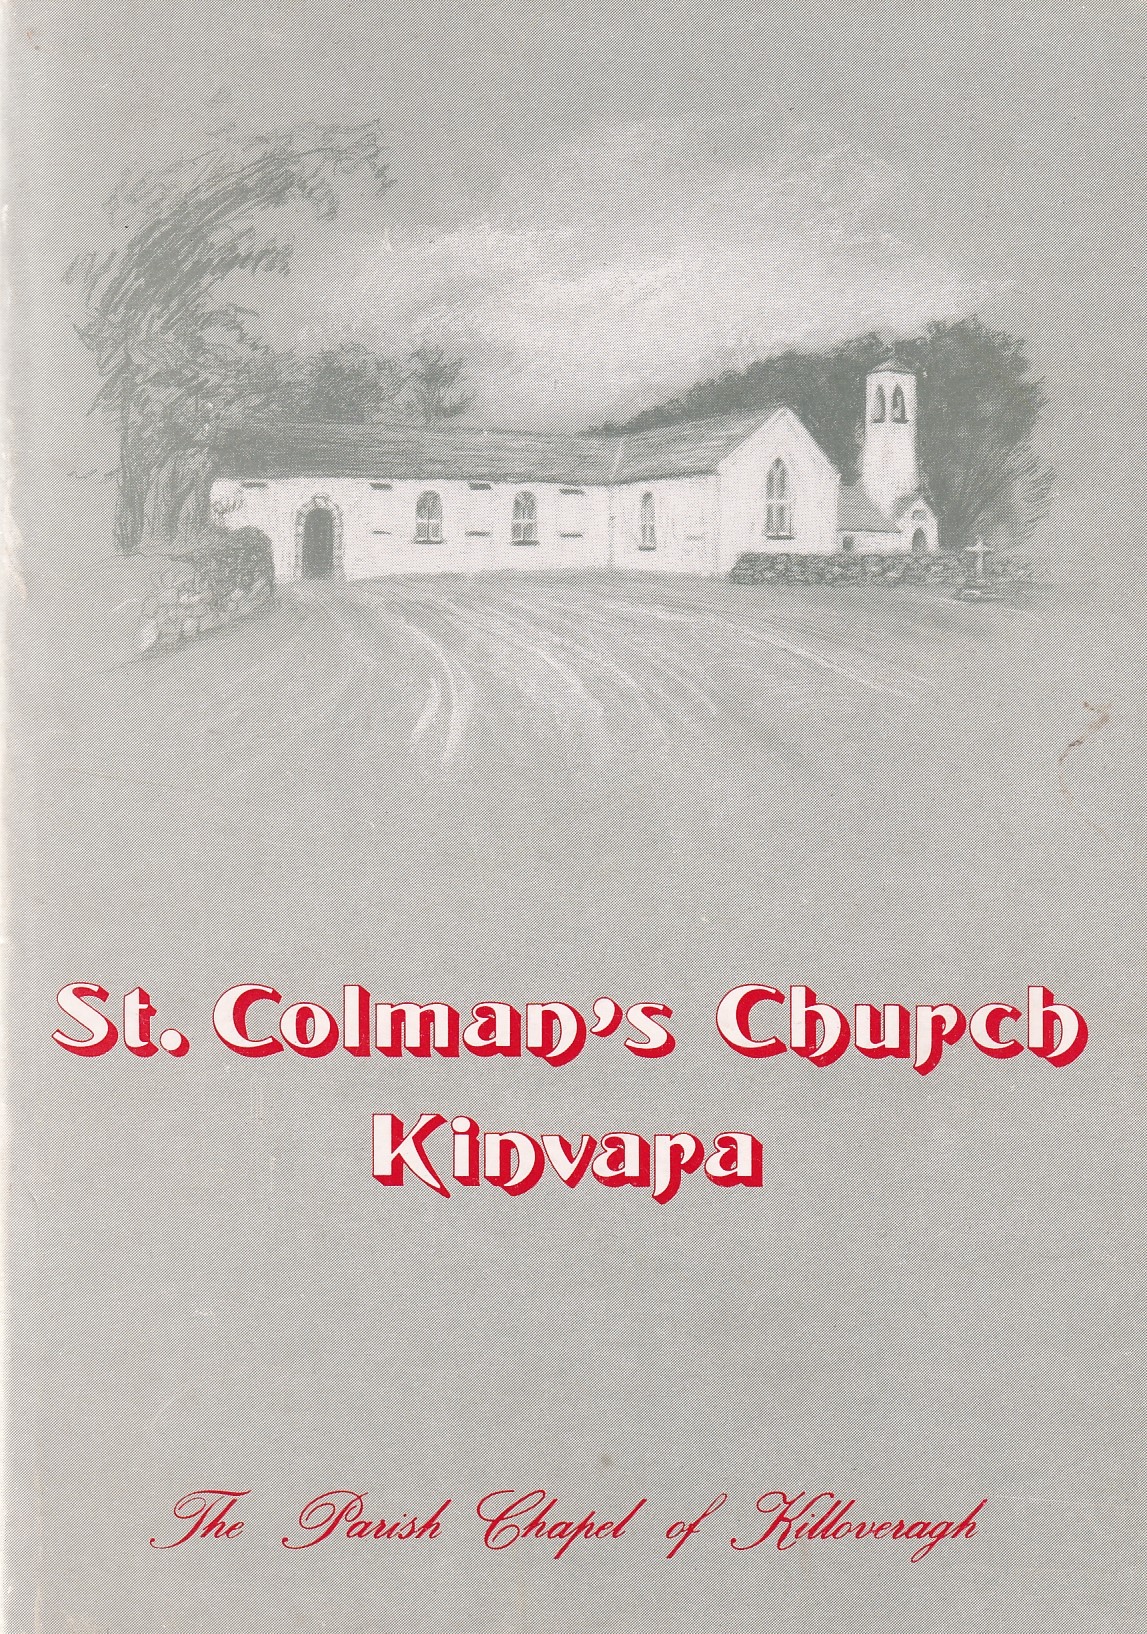 St. Colman’s Church Kinvara [Signed] by J. W. O'Connell